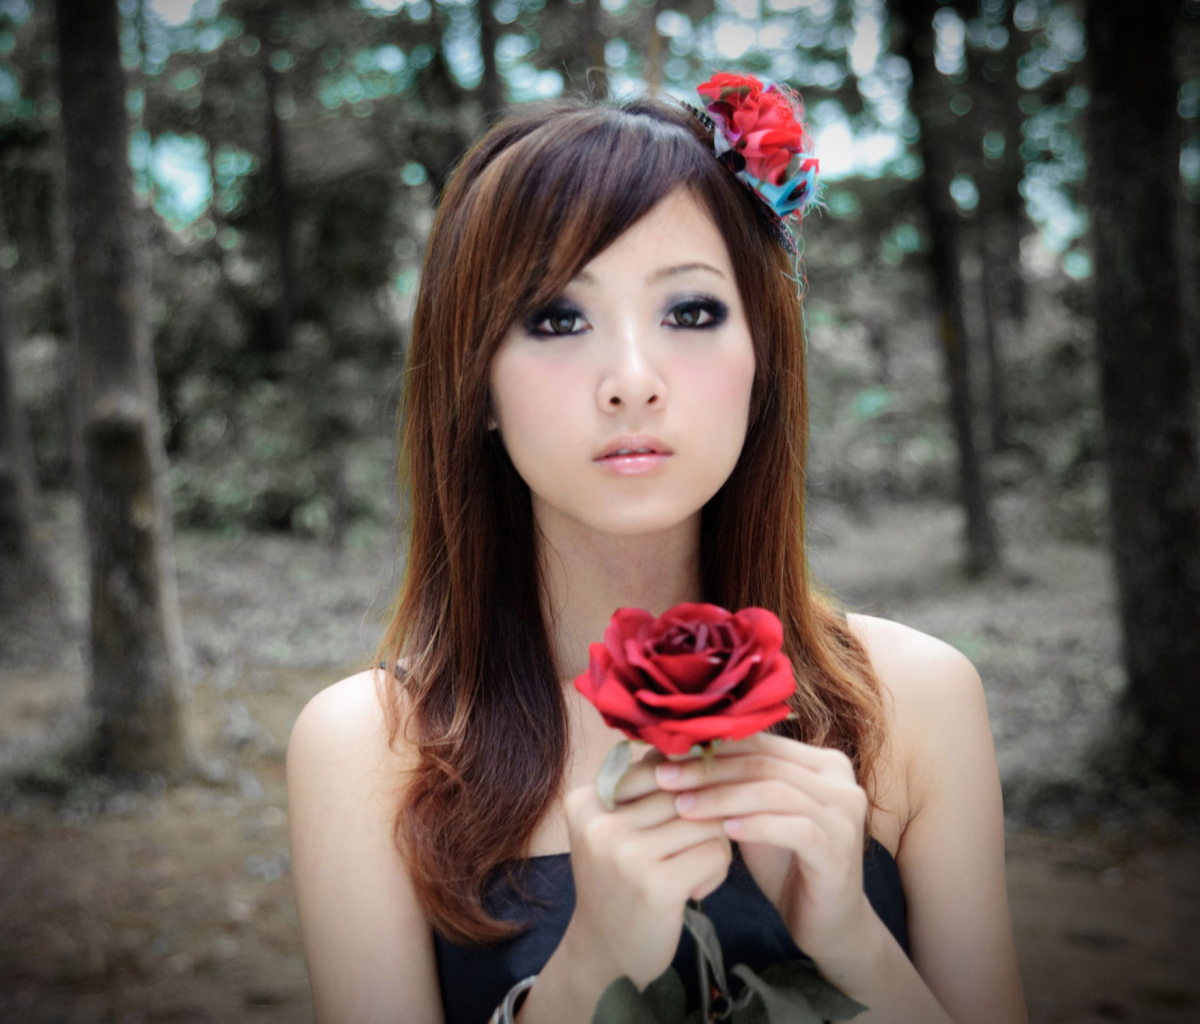 Asian Girl With Red Rose wallpaper 1200x1024